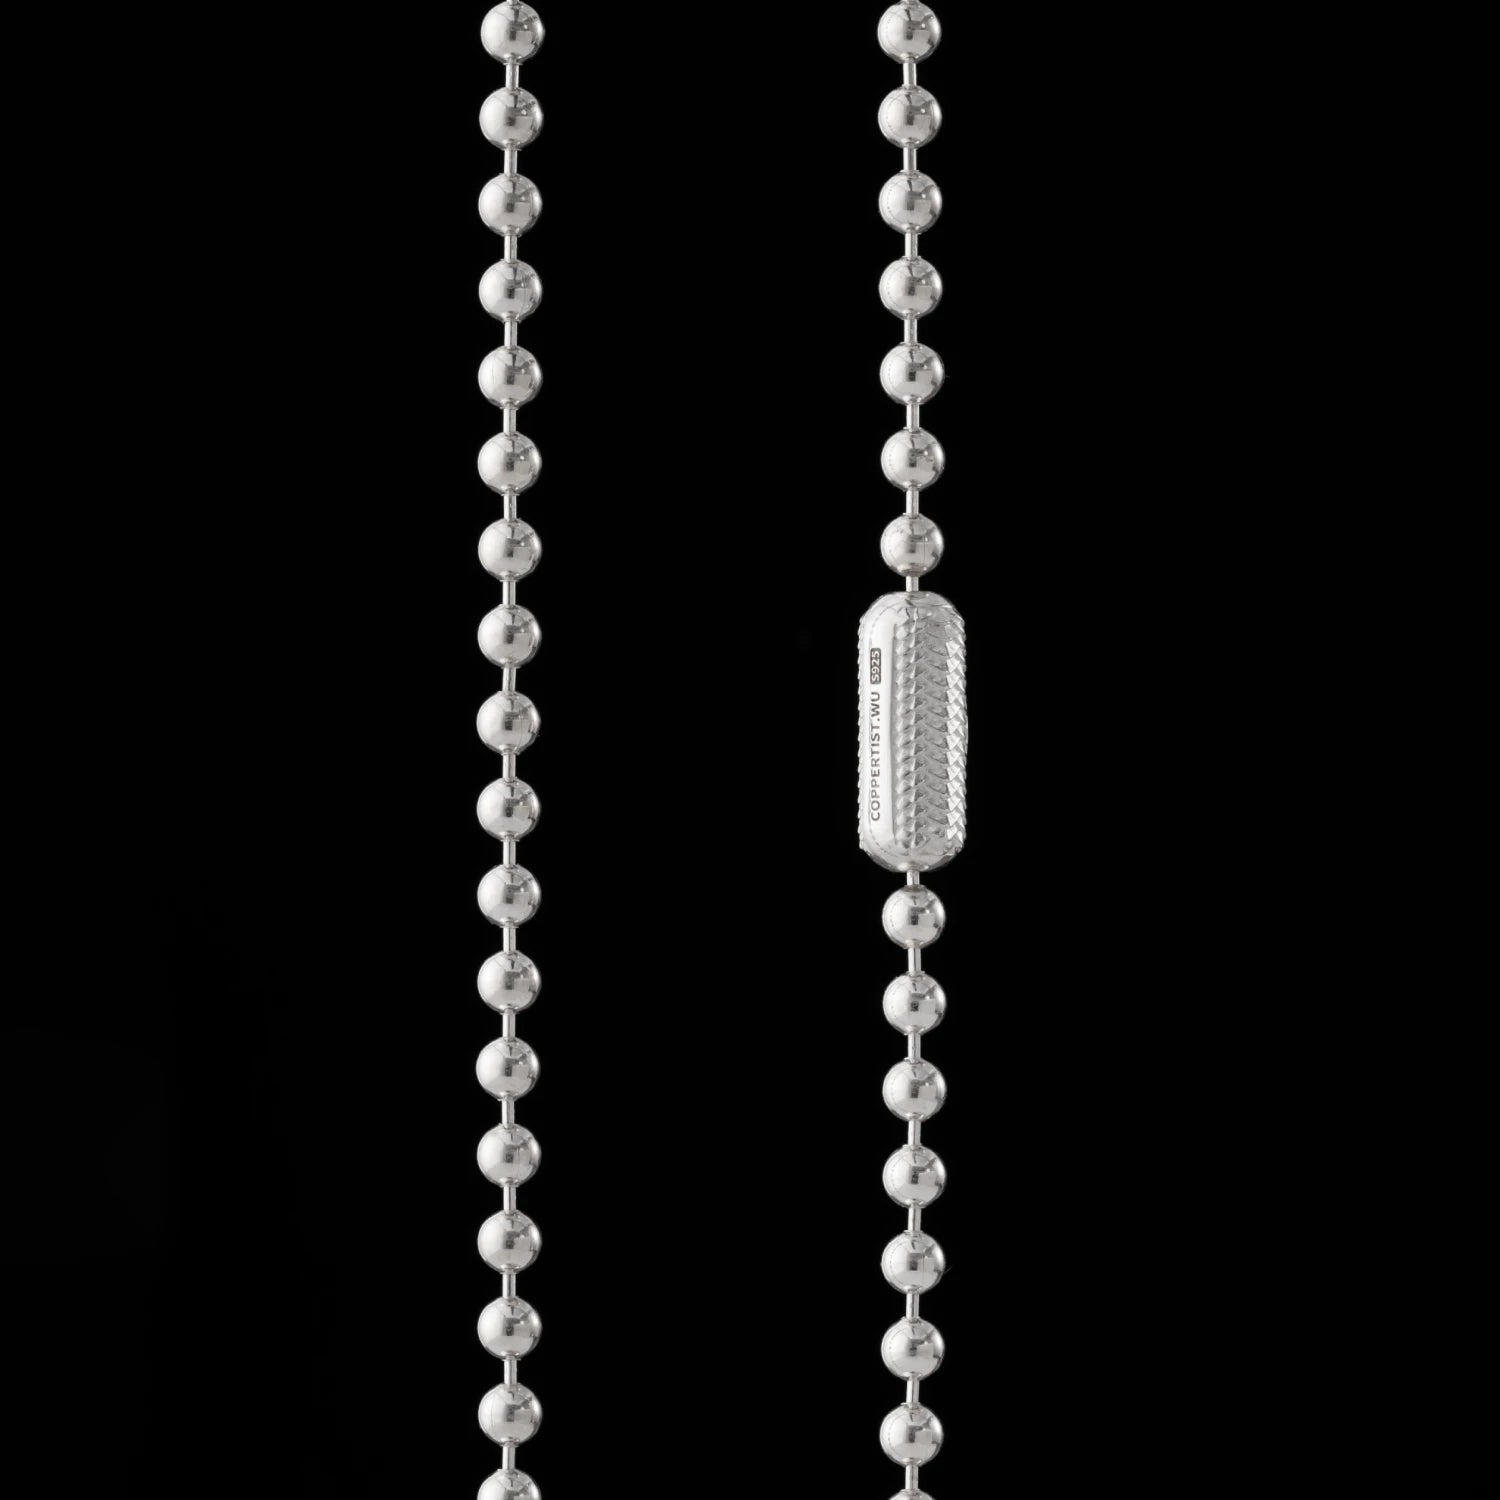 Snake Scale Ball Chain Necklace - 4mm Silver